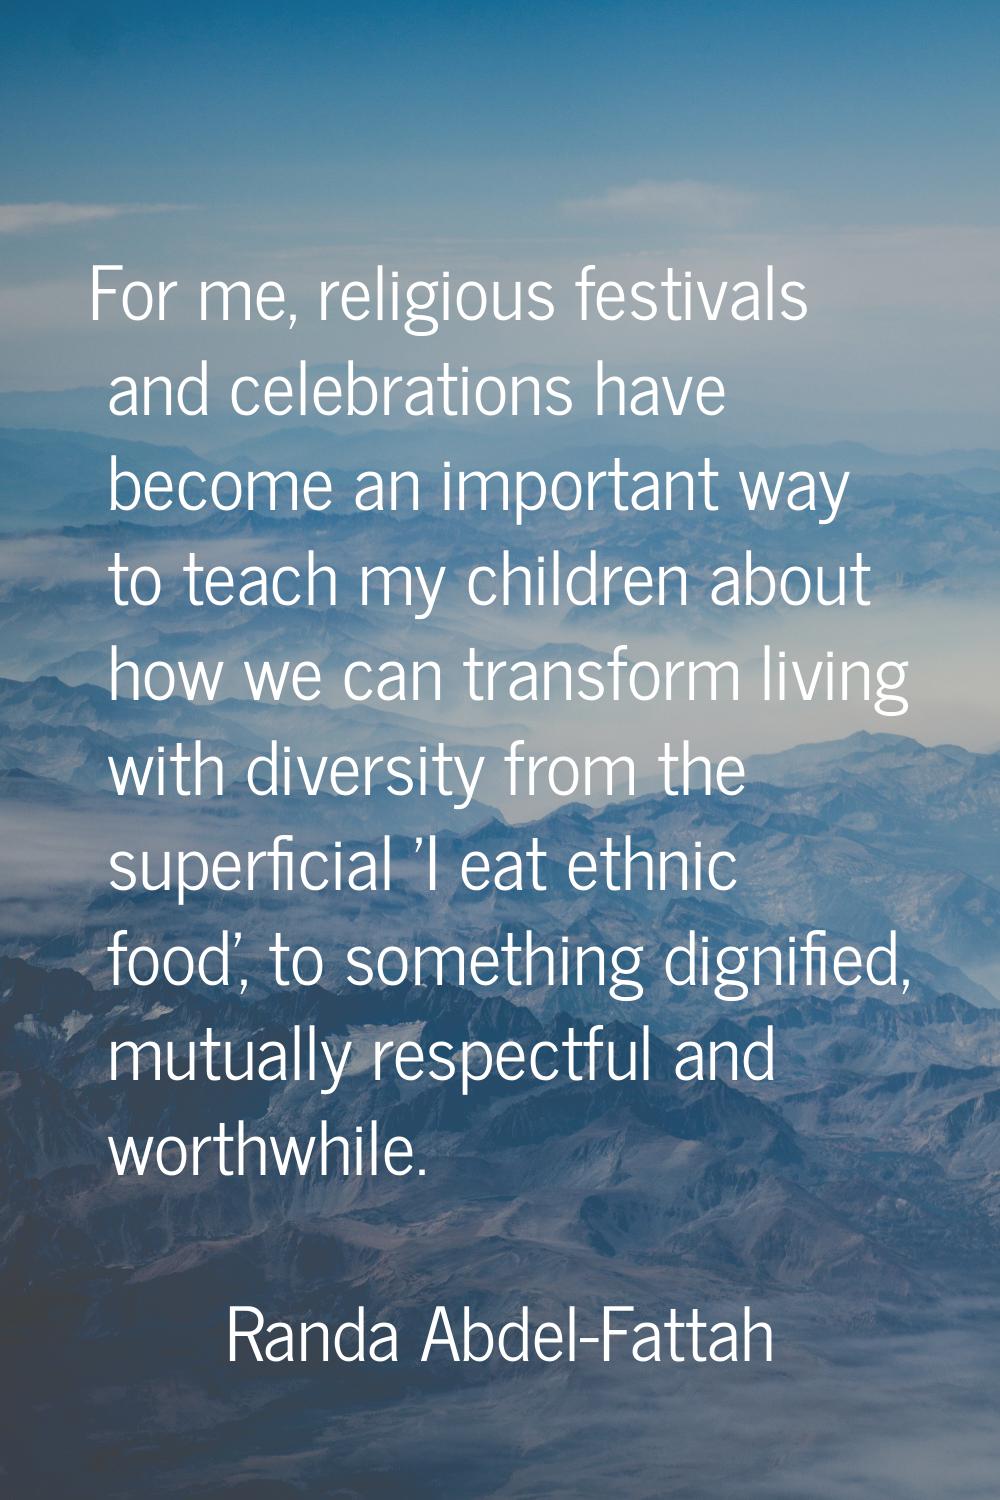 For me, religious festivals and celebrations have become an important way to teach my children abou